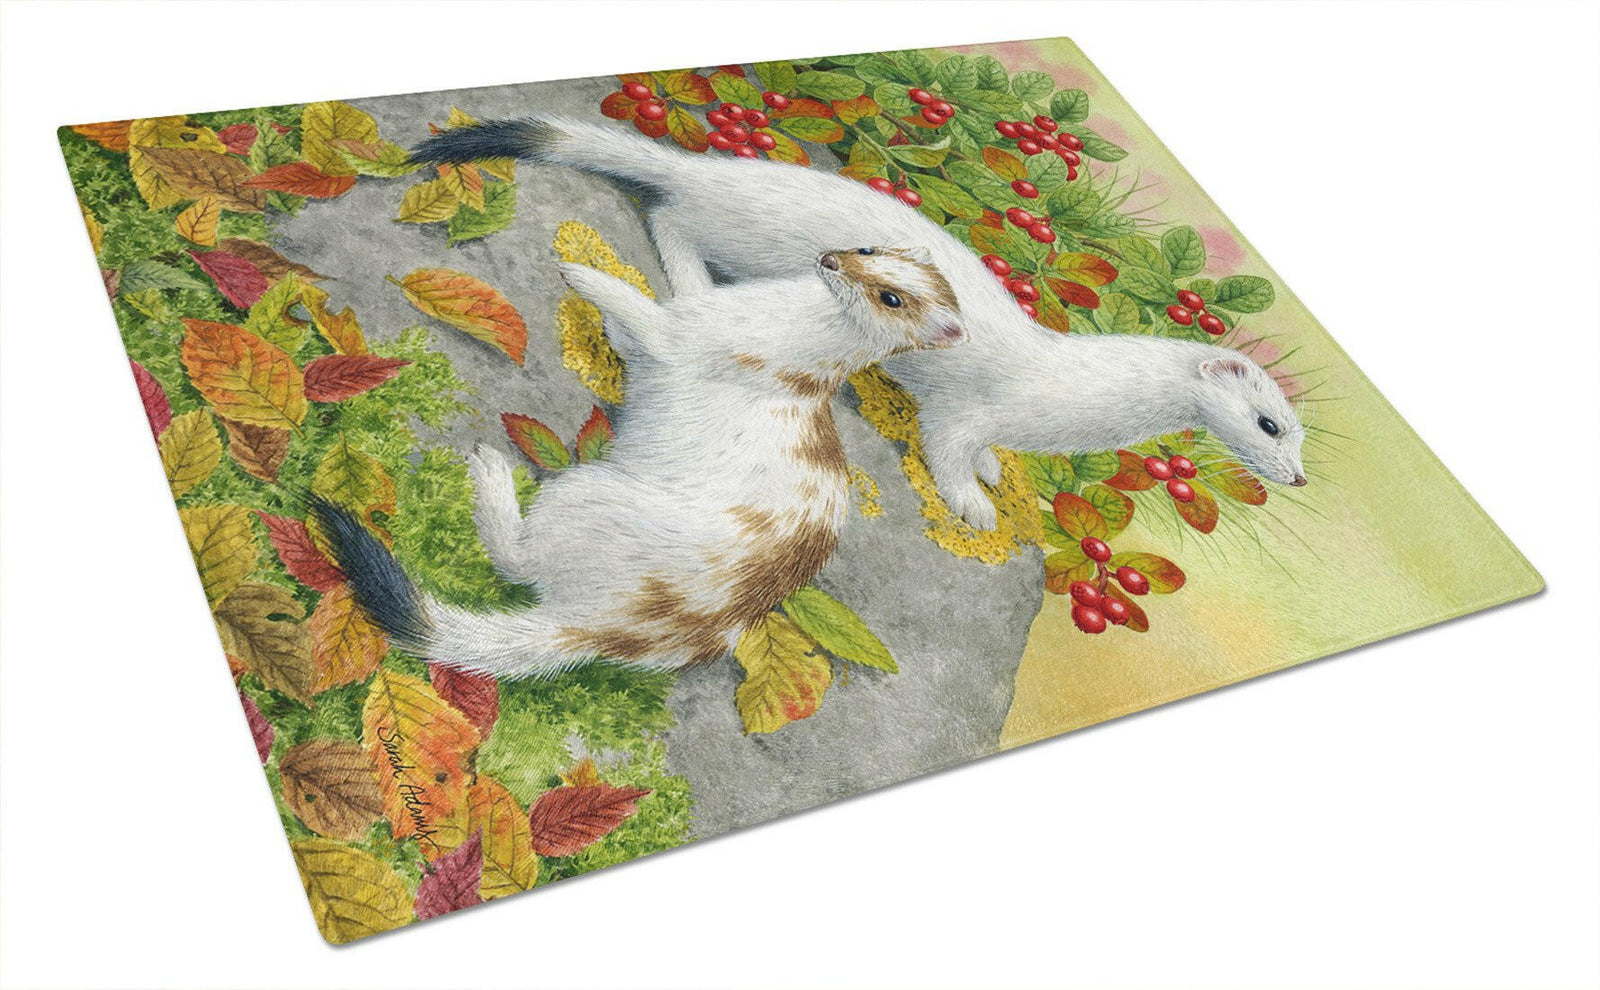 Ermine Stoat Short-tailed Weasel Glass Cutting Board Large ASA2138LCB by Caroline's Treasures